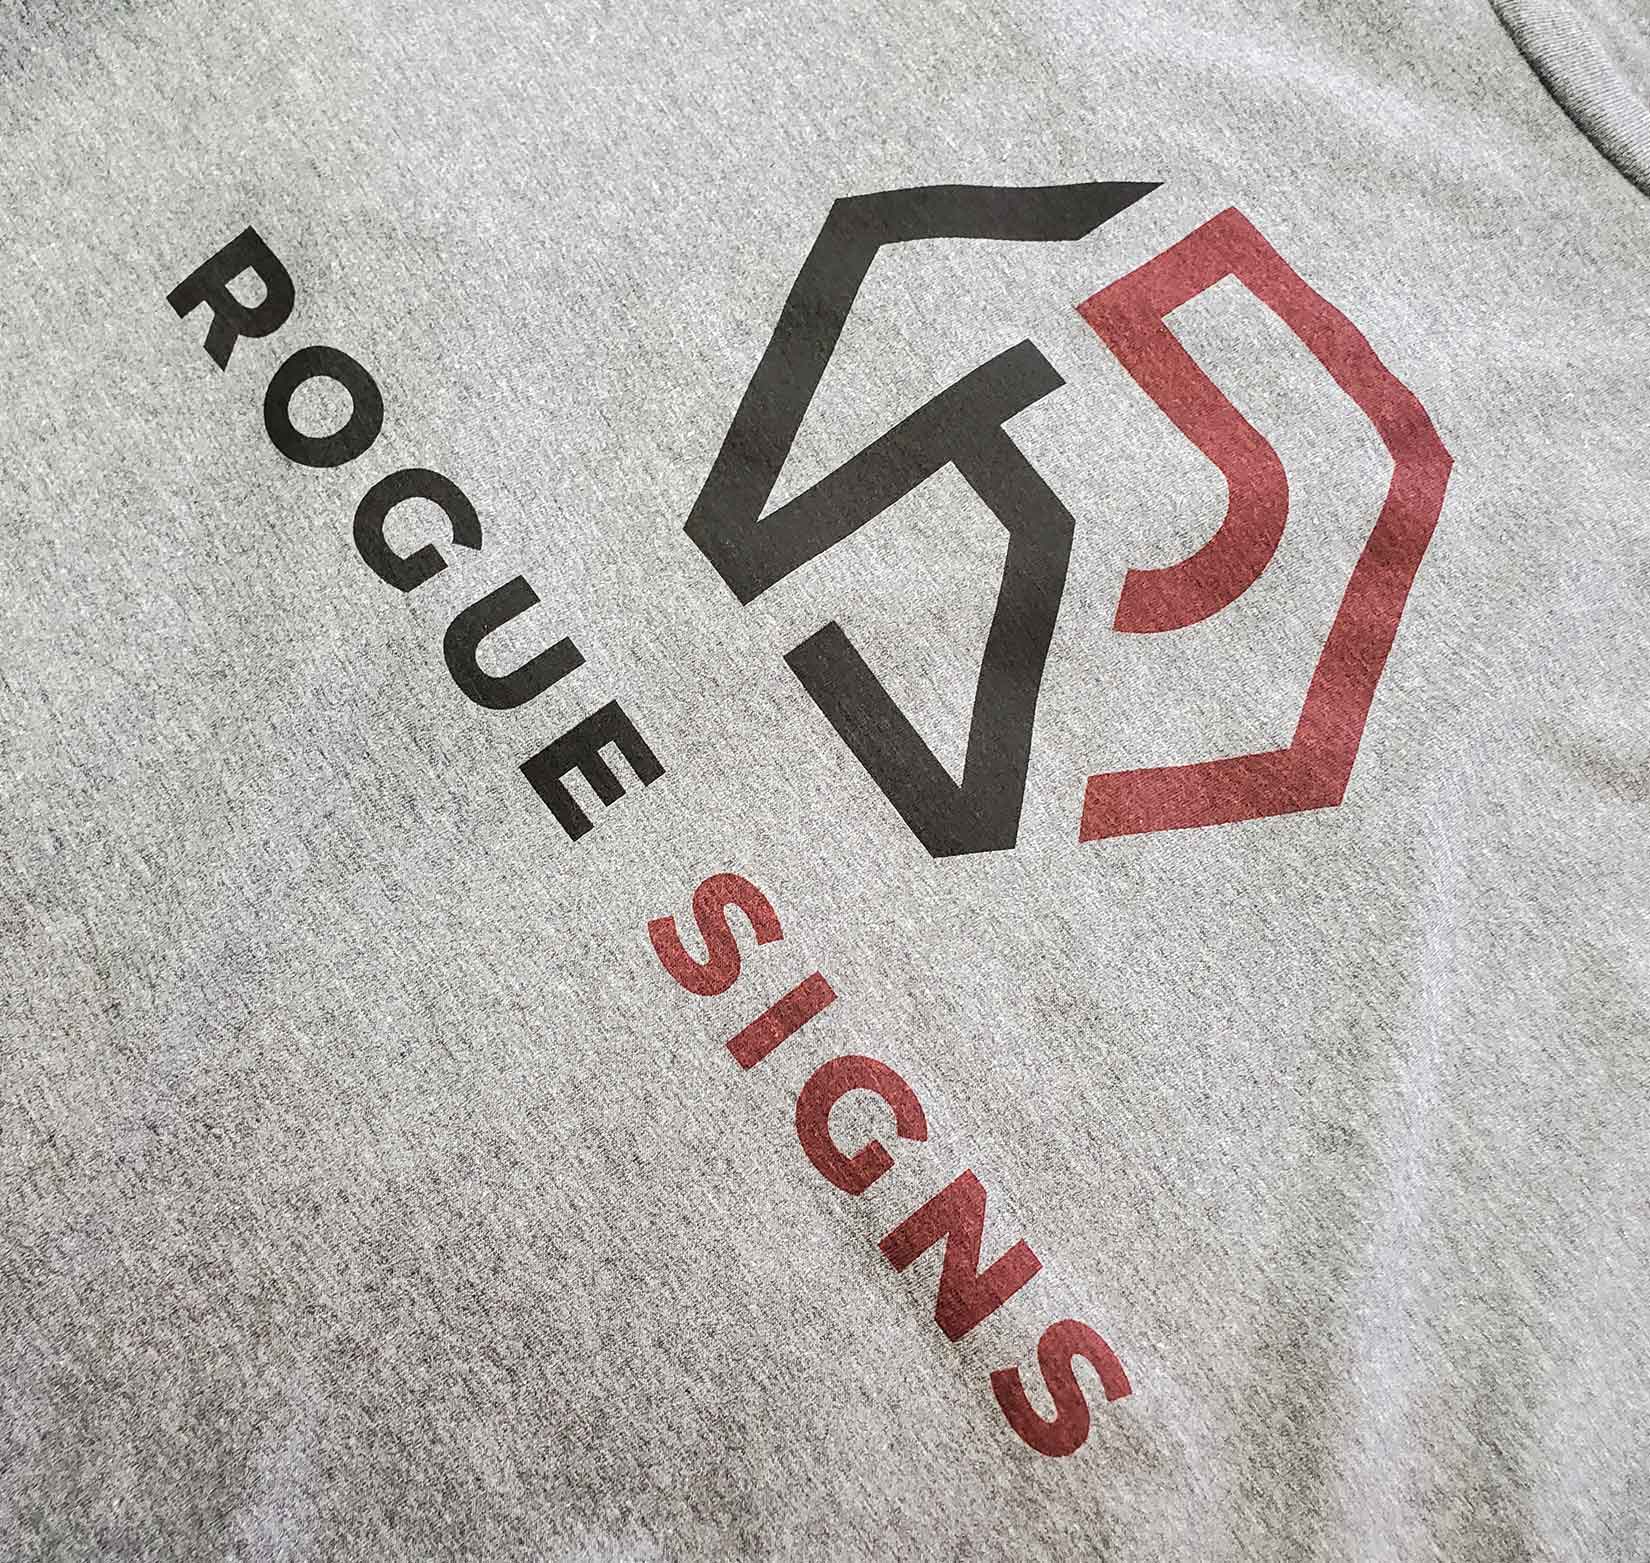 A gray t-shirt that reads rogue signs and has the company's logo.